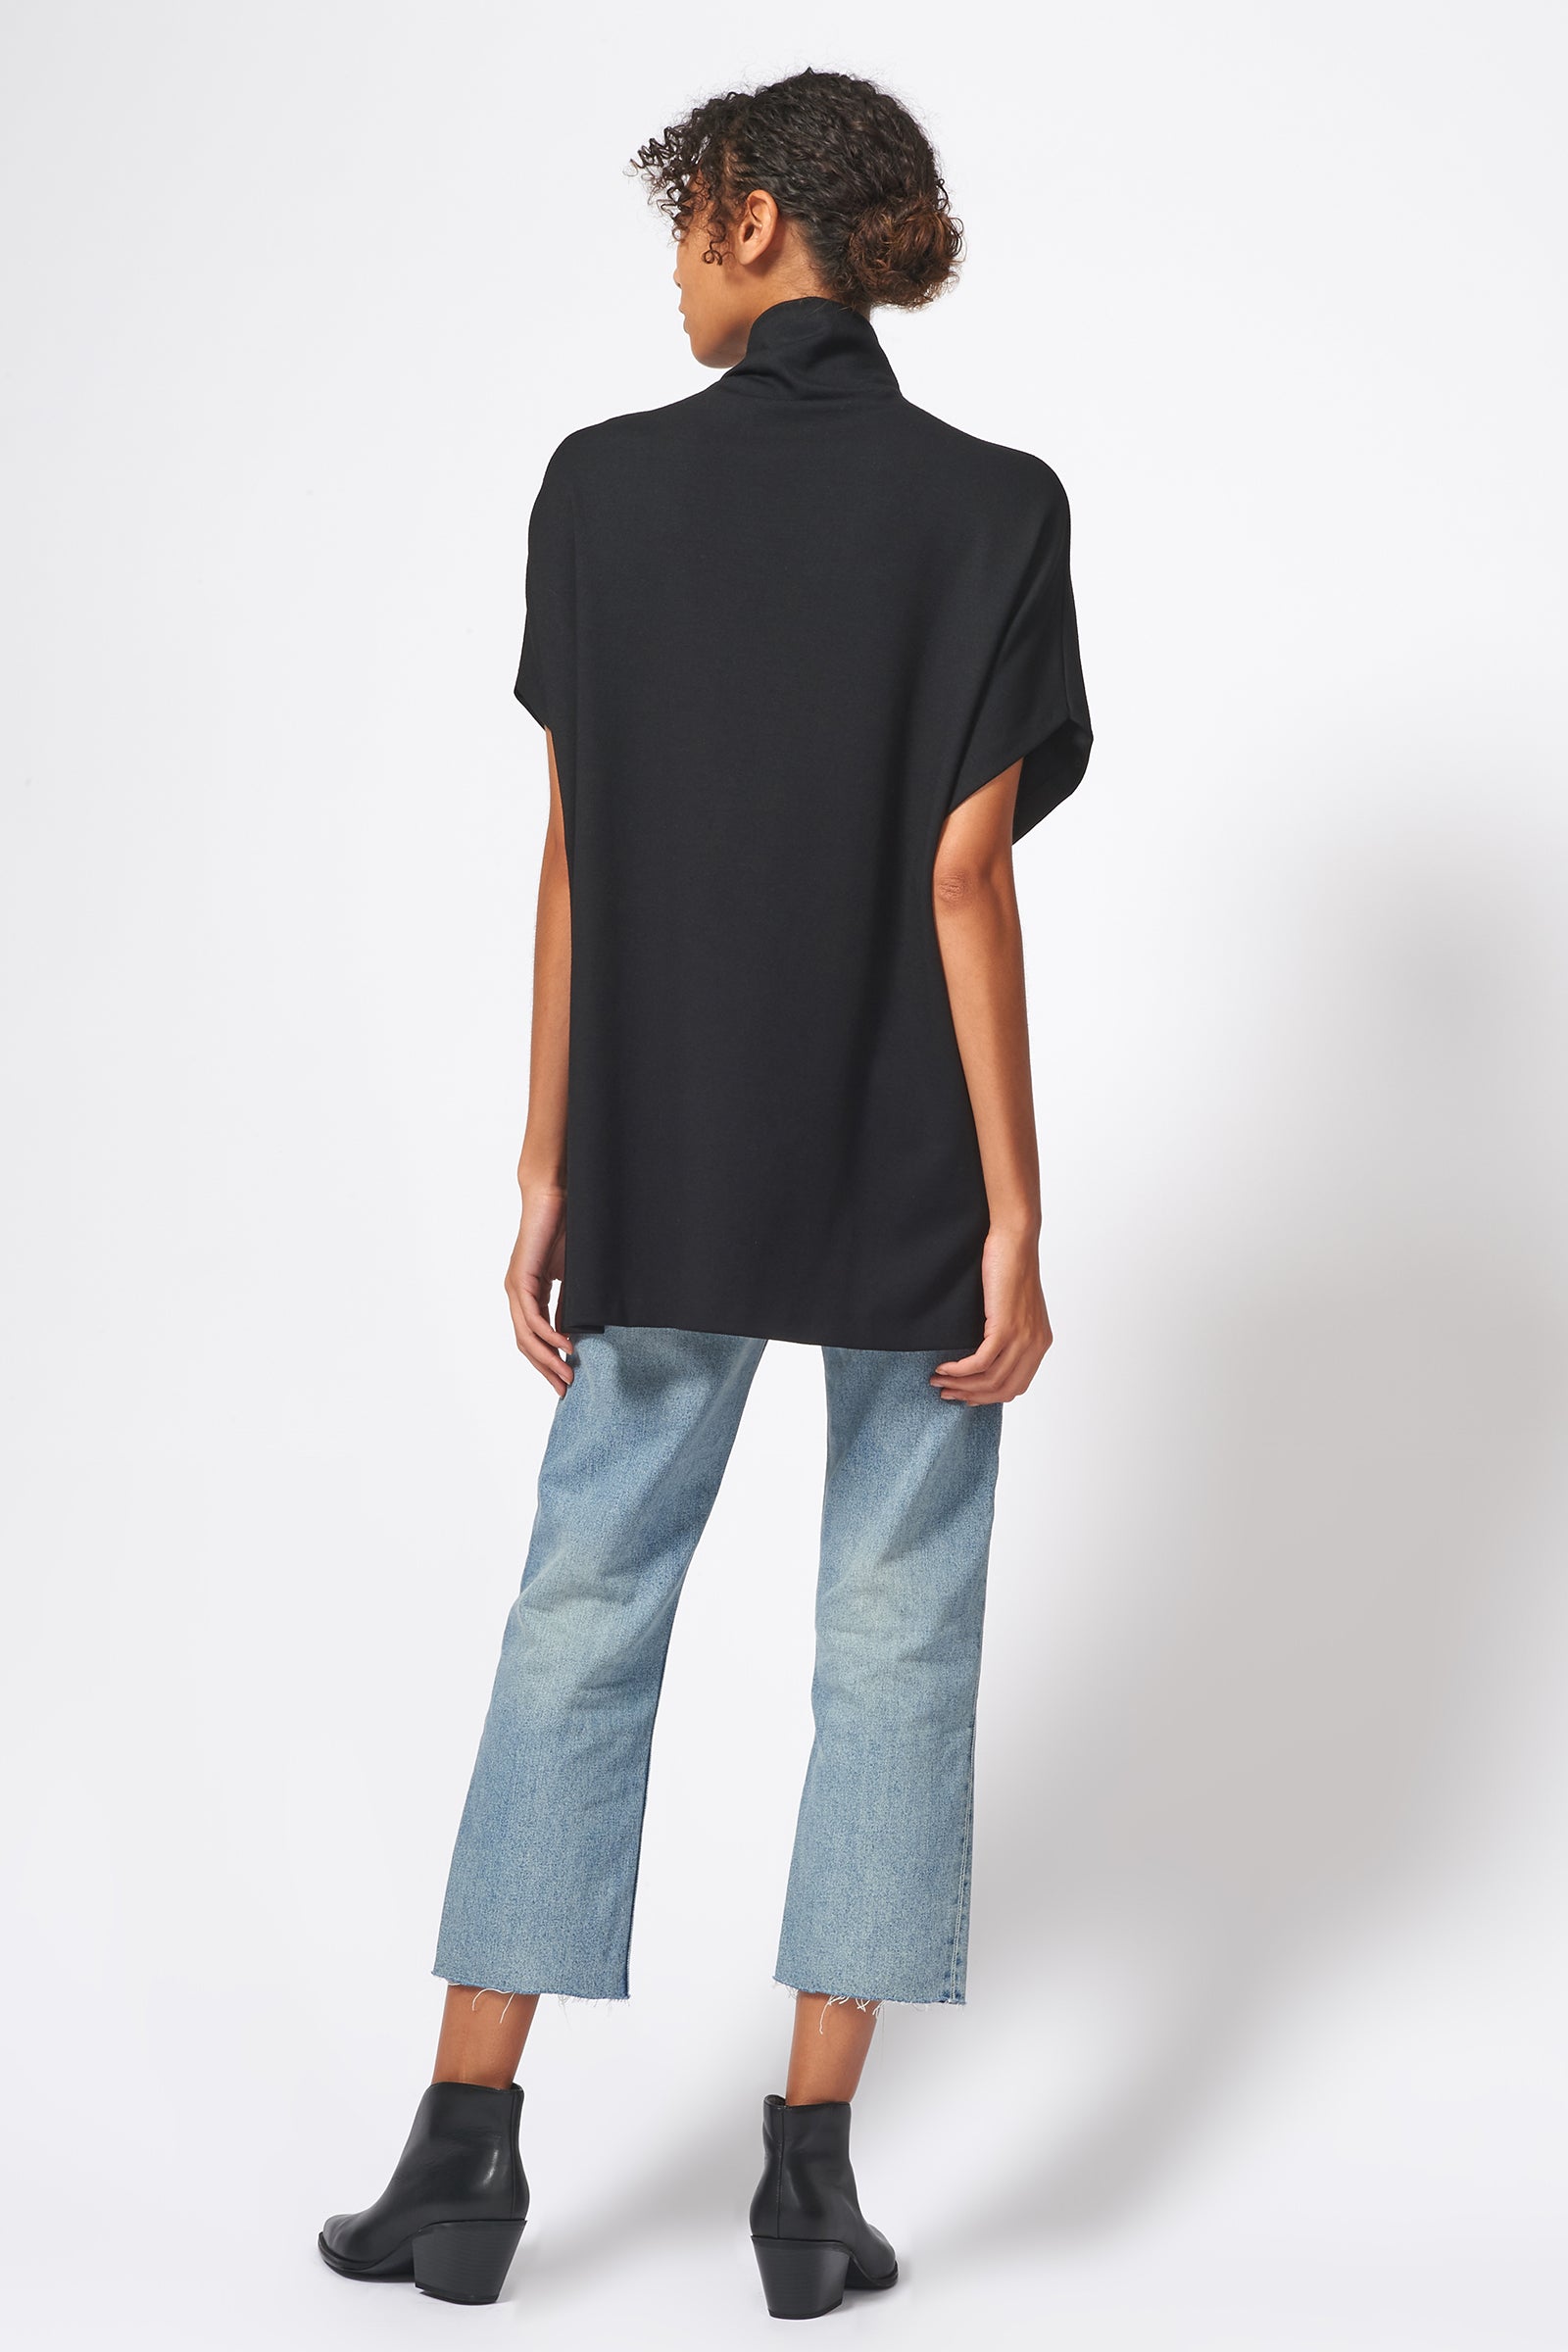 Kal Rieman Ponte Funnelneck in Black on Model Full Back View with Cropped Jeans